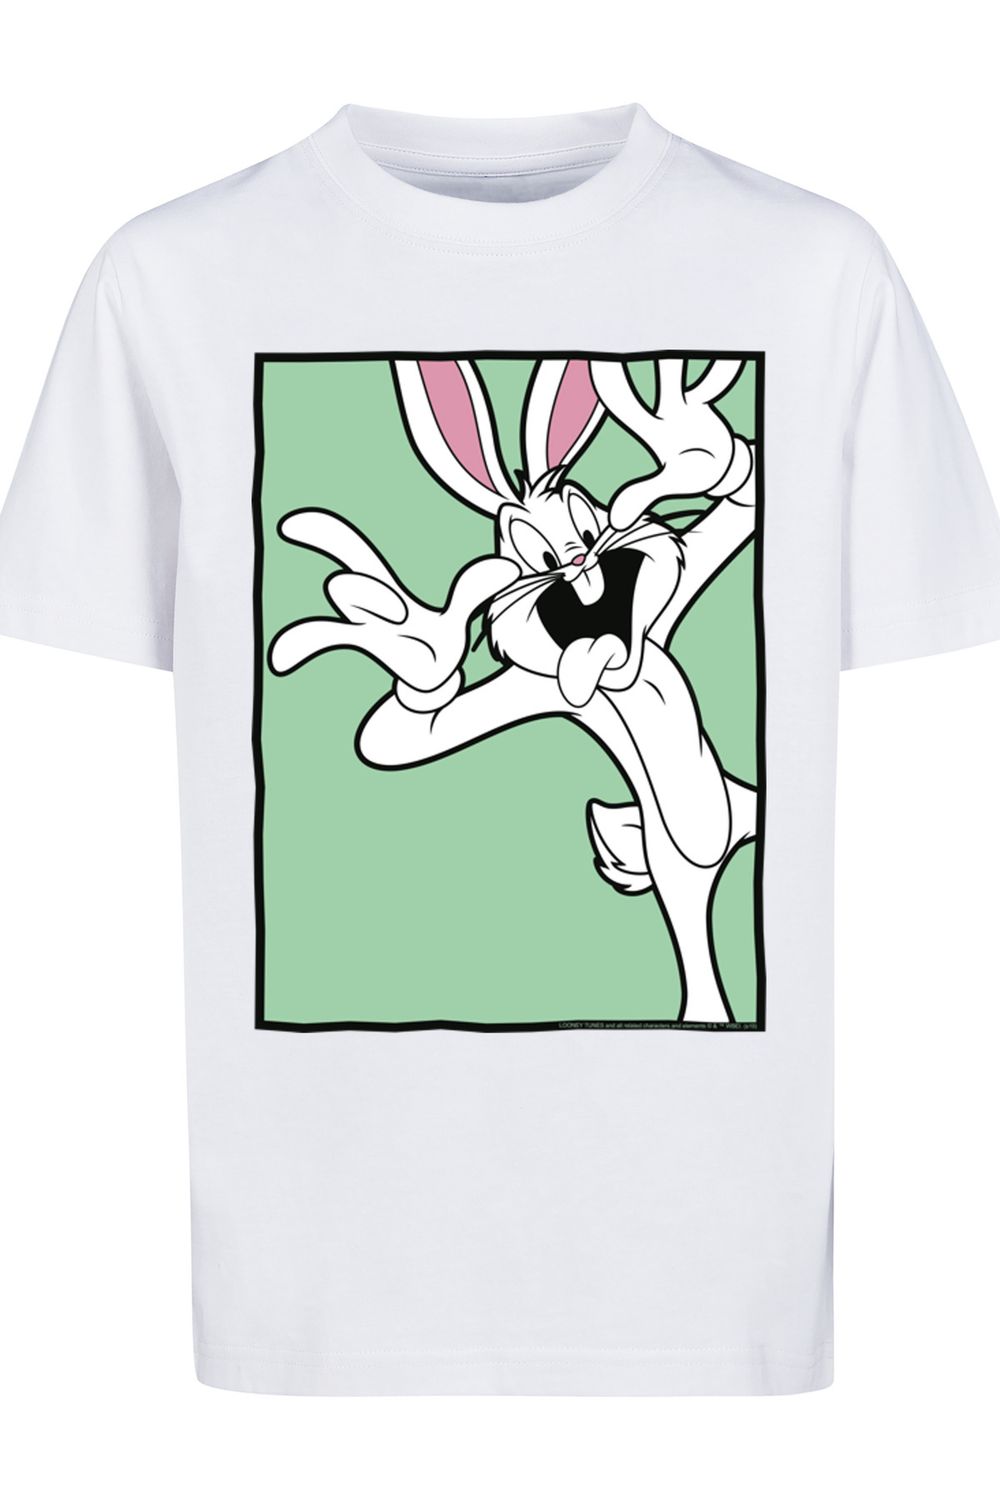 Bugs Looney mit Face-WHT Basic Kids T-Shirt Funny Tunes Kinder F4NT4STIC - Trendyol Bunny